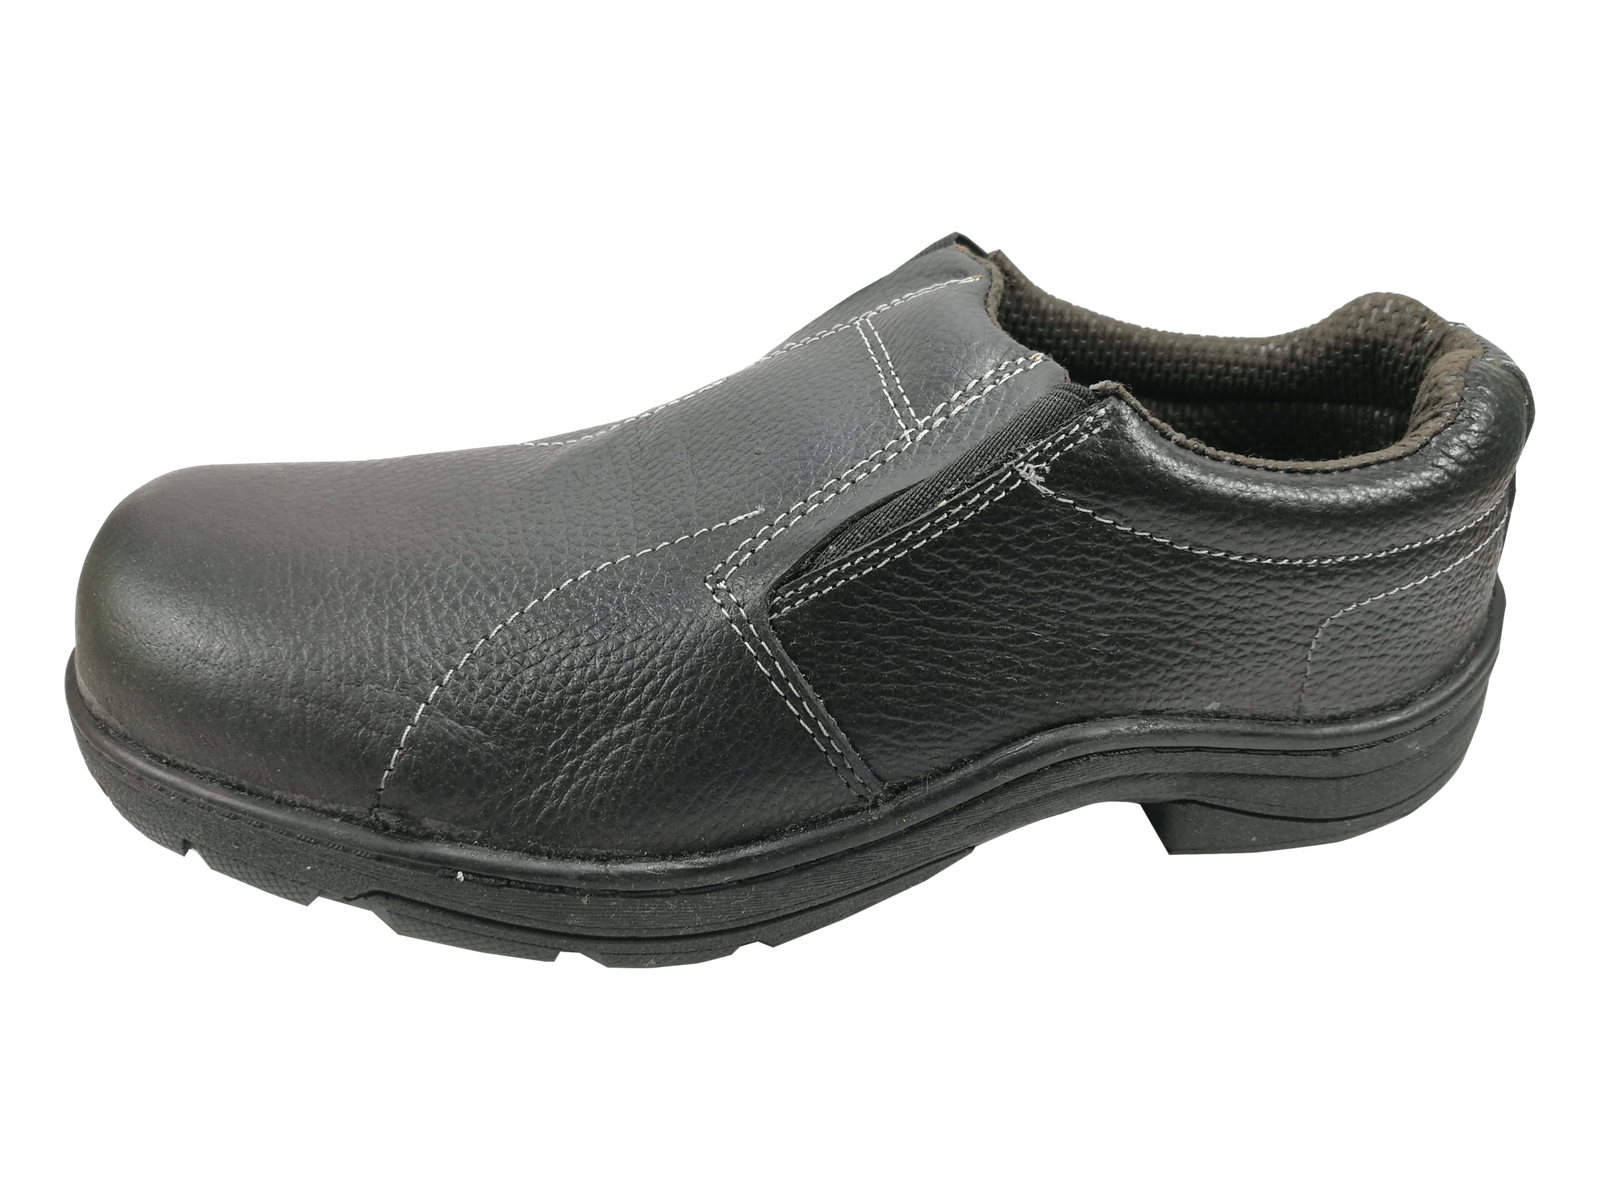 Frontier Safety Shoes Durable Comfortable -Sunrise Industrial Engineering